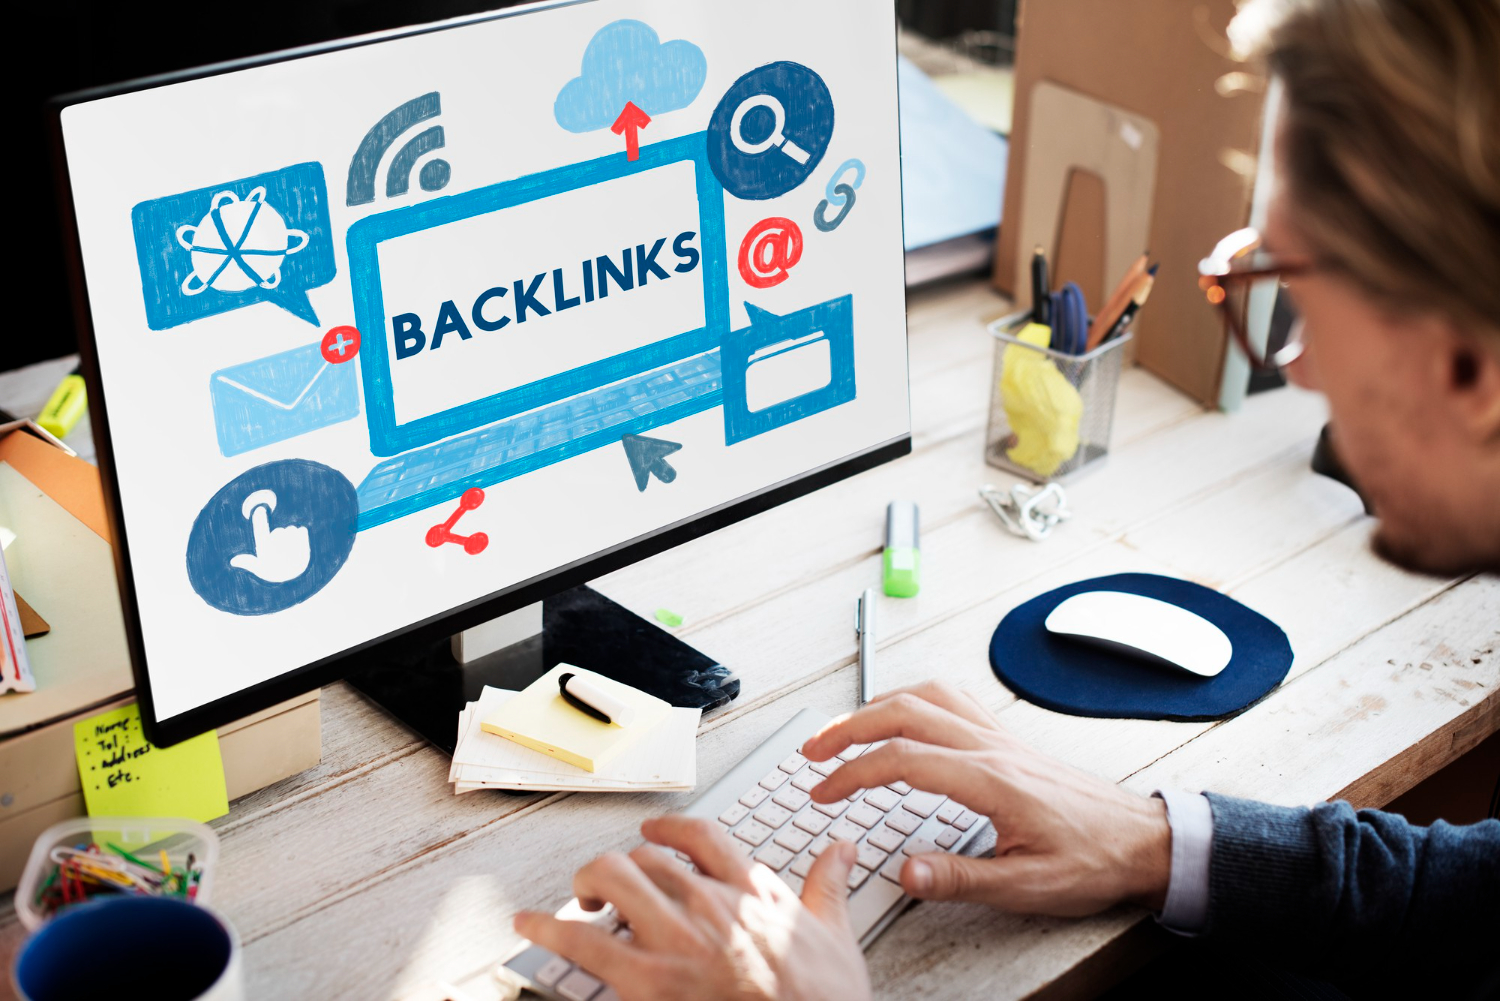 How does backlink quality affect SEO ranking?